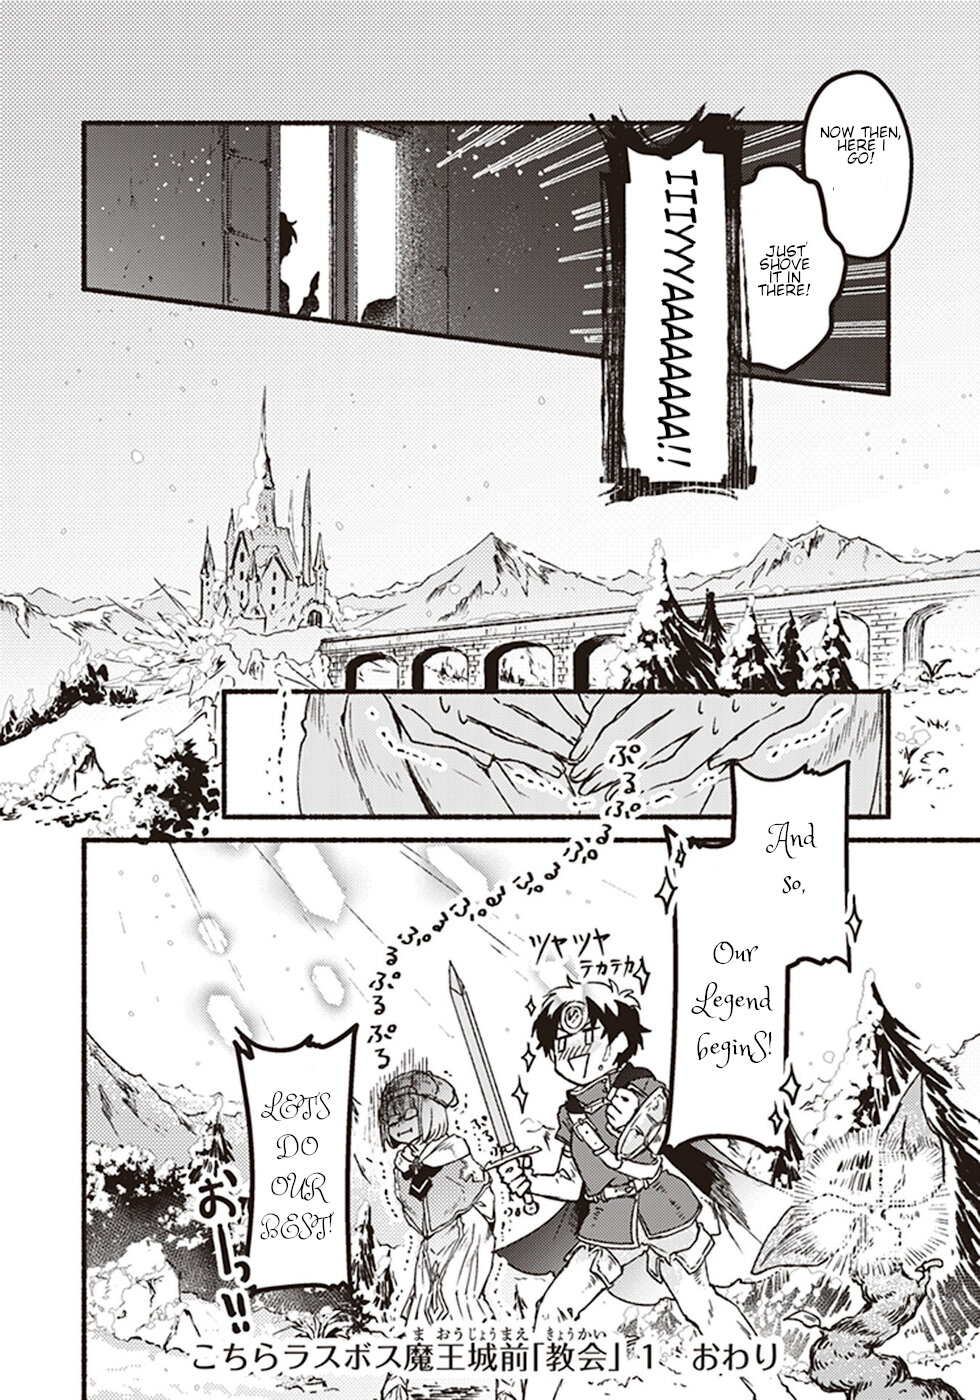 The Church in Front of the Devil’s Castle Vol. 1 Ch. 5 Time Passes As You Chase After It